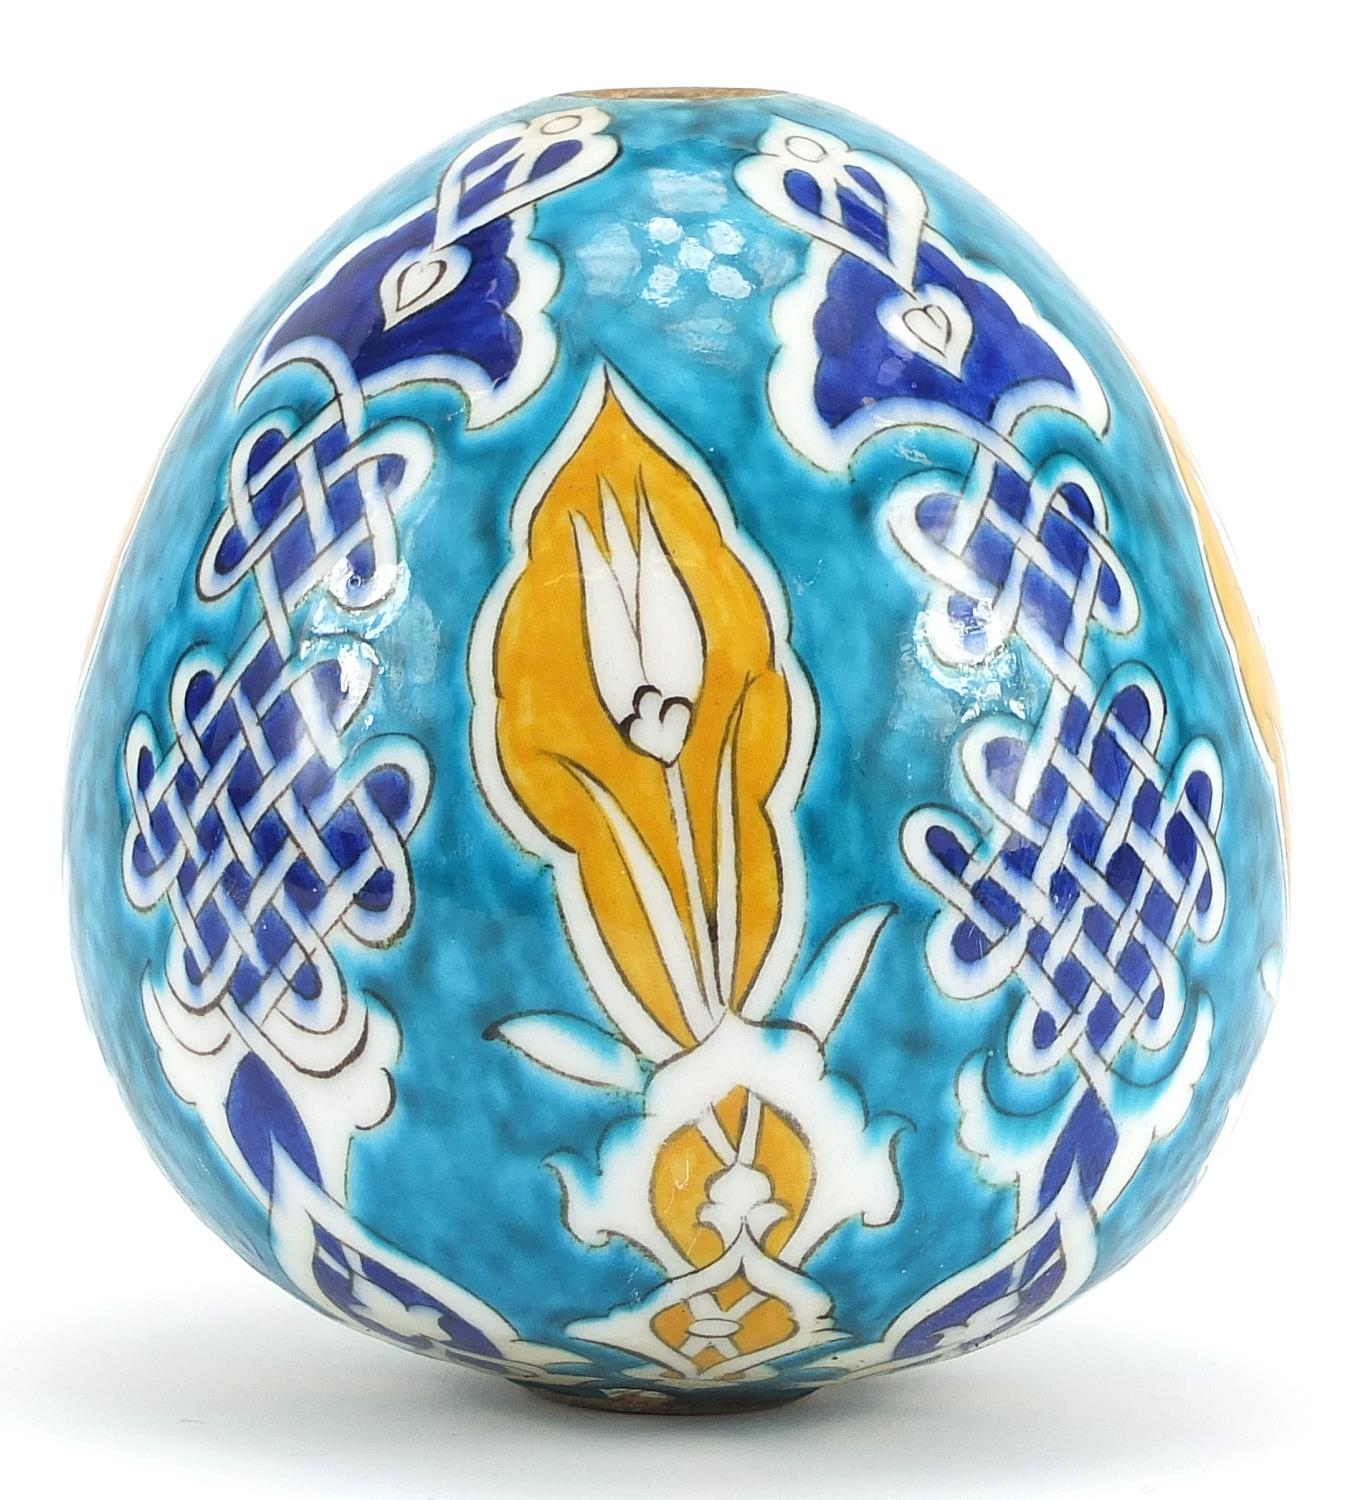 Turkish Iznik pottery hanging ball hand painted with flowers, 12.5cm high